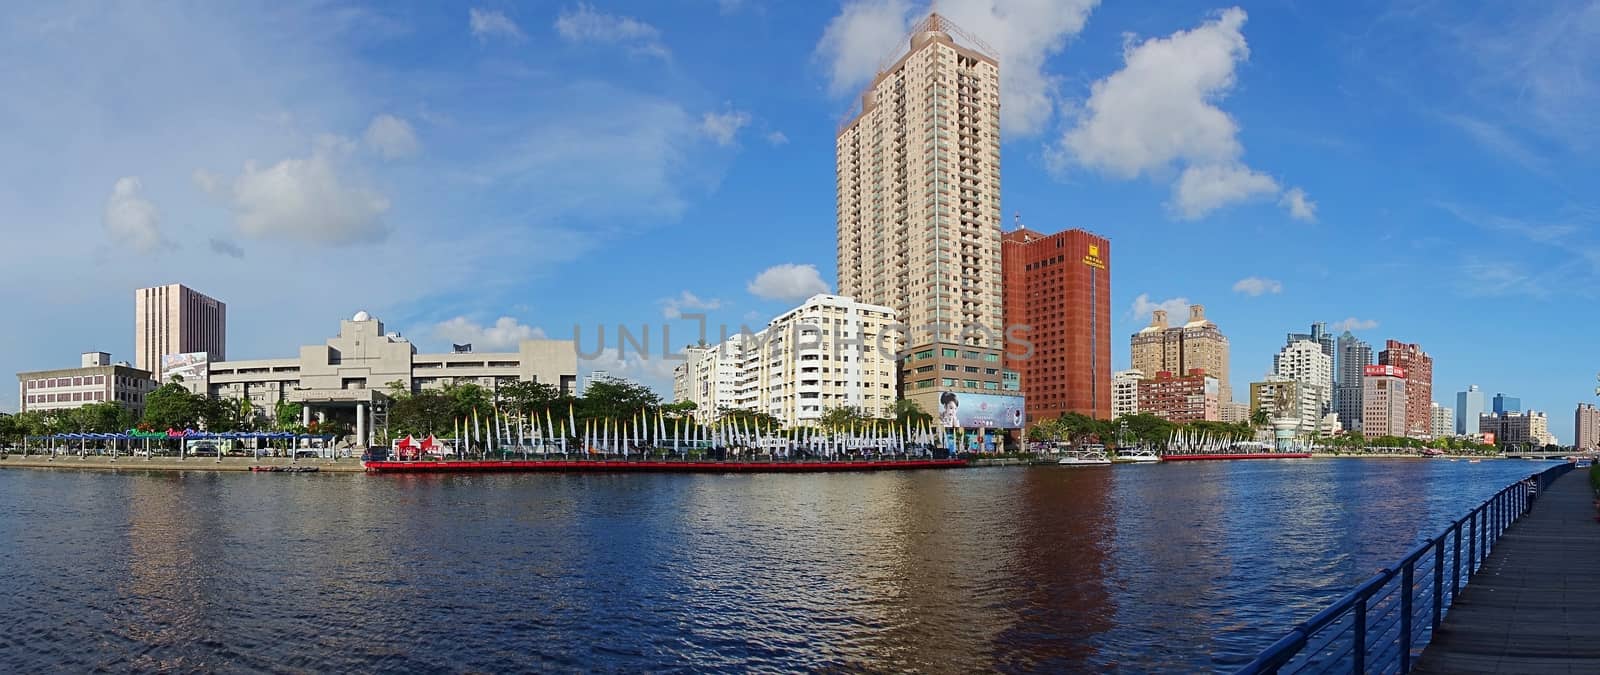 Panoramic View of the Love River in Kaohsiung by shiyali